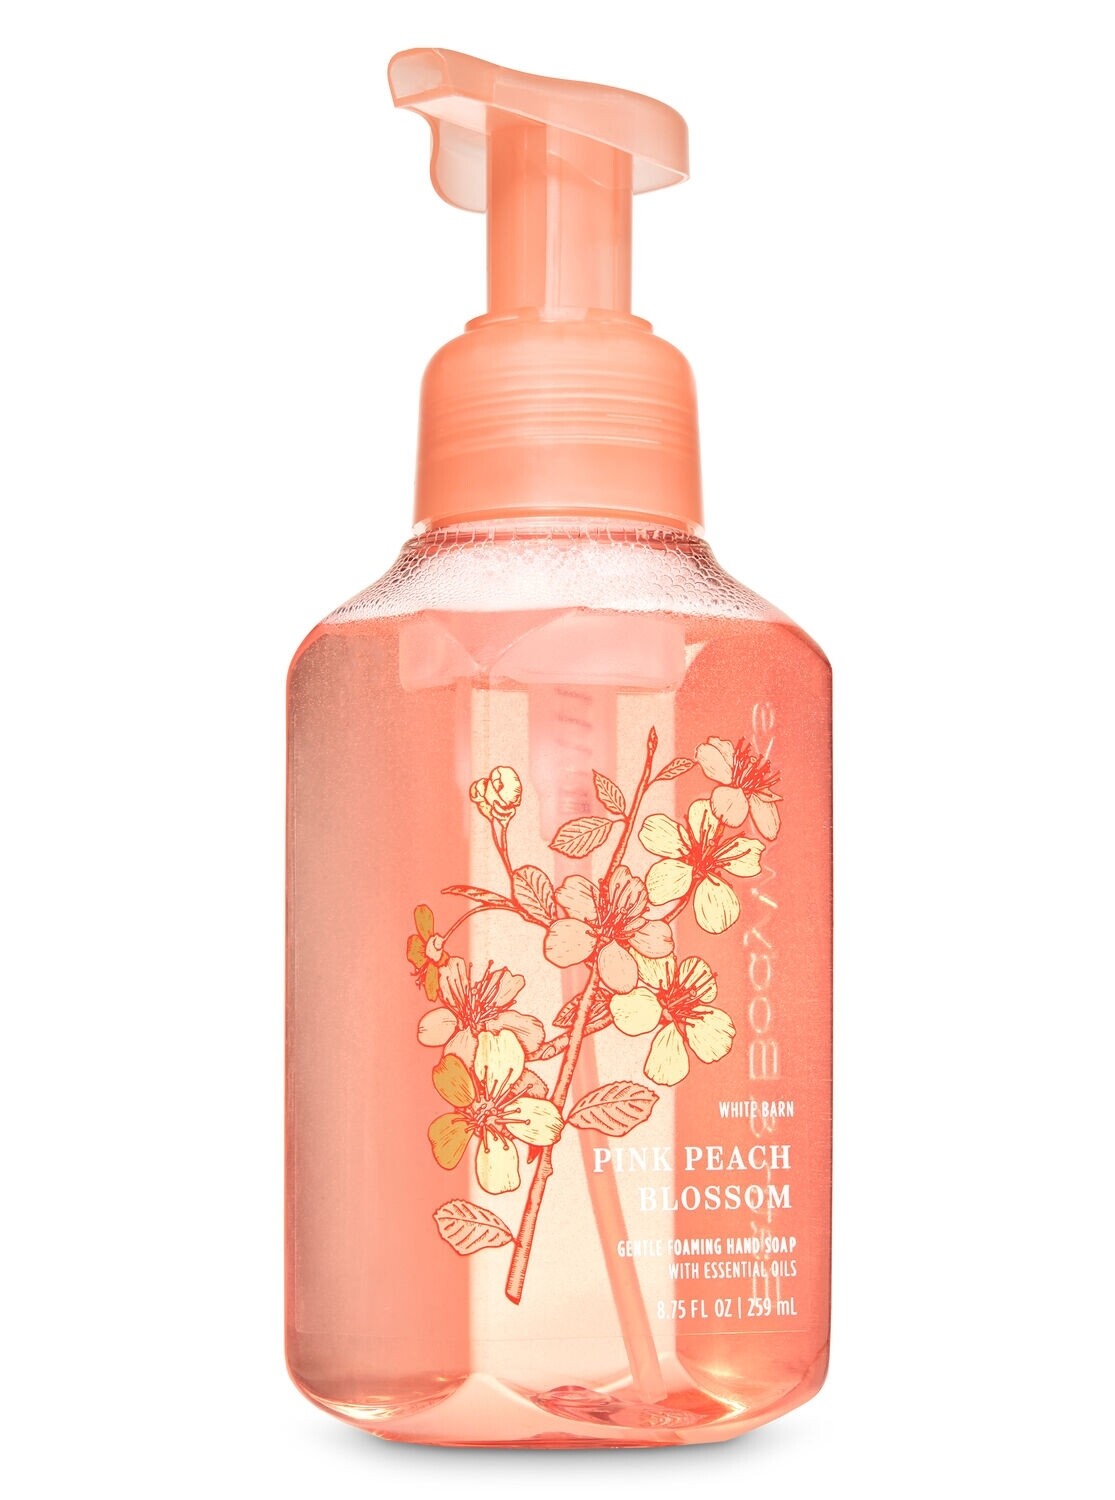 PINK PEACH BLOSSOM-Gentle Foaming Hand Soap